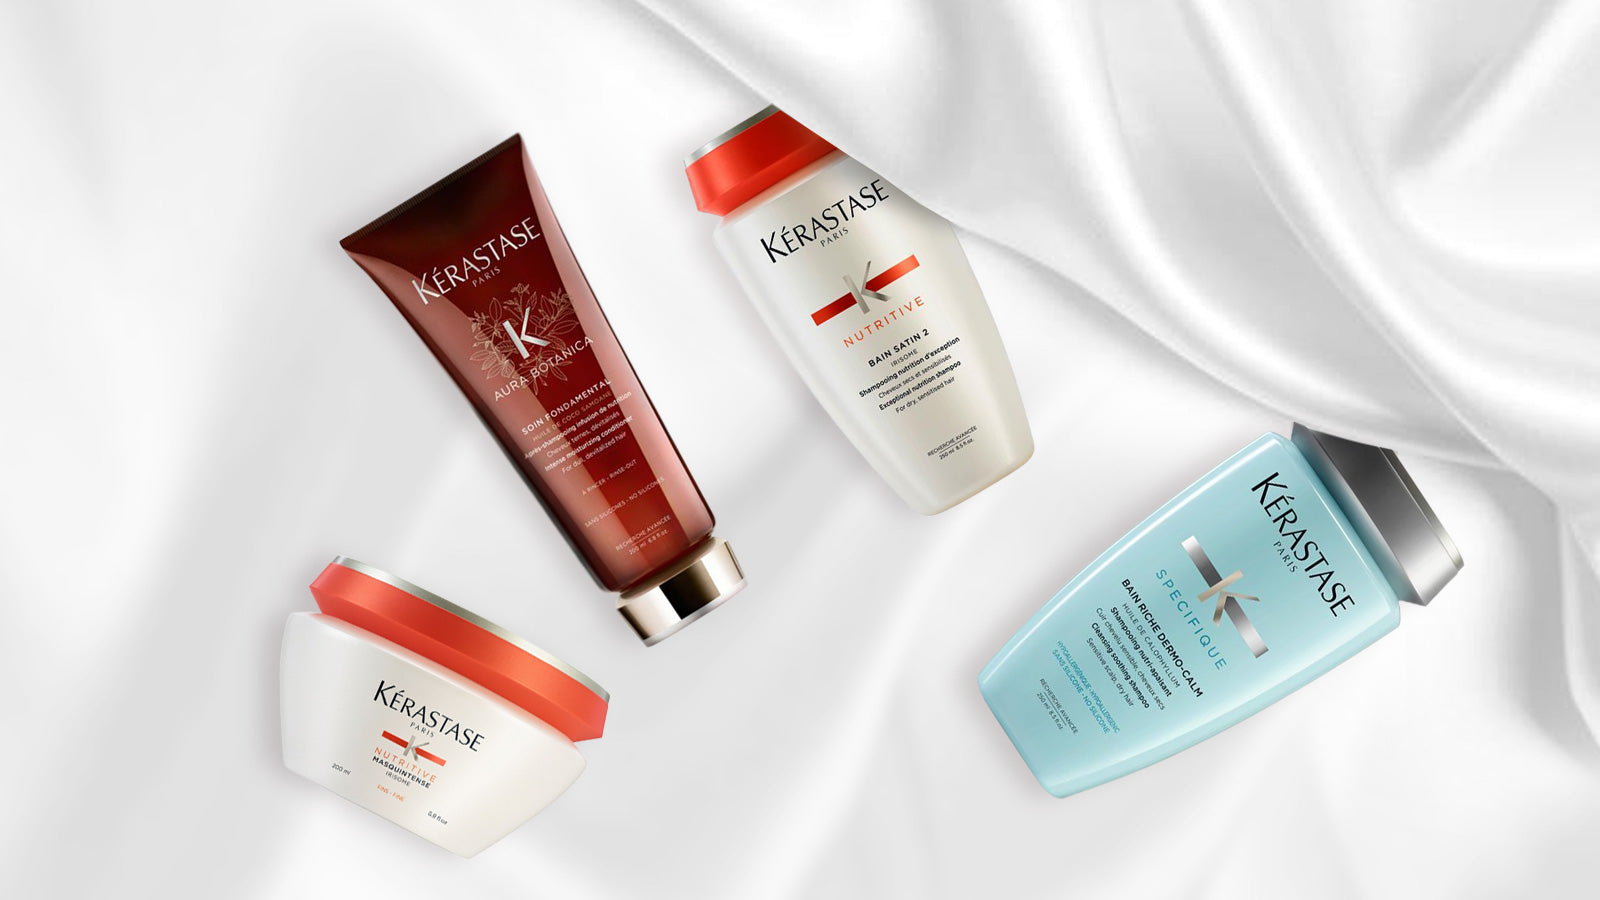 Kerastase Products by Active Care Store: Revolution in